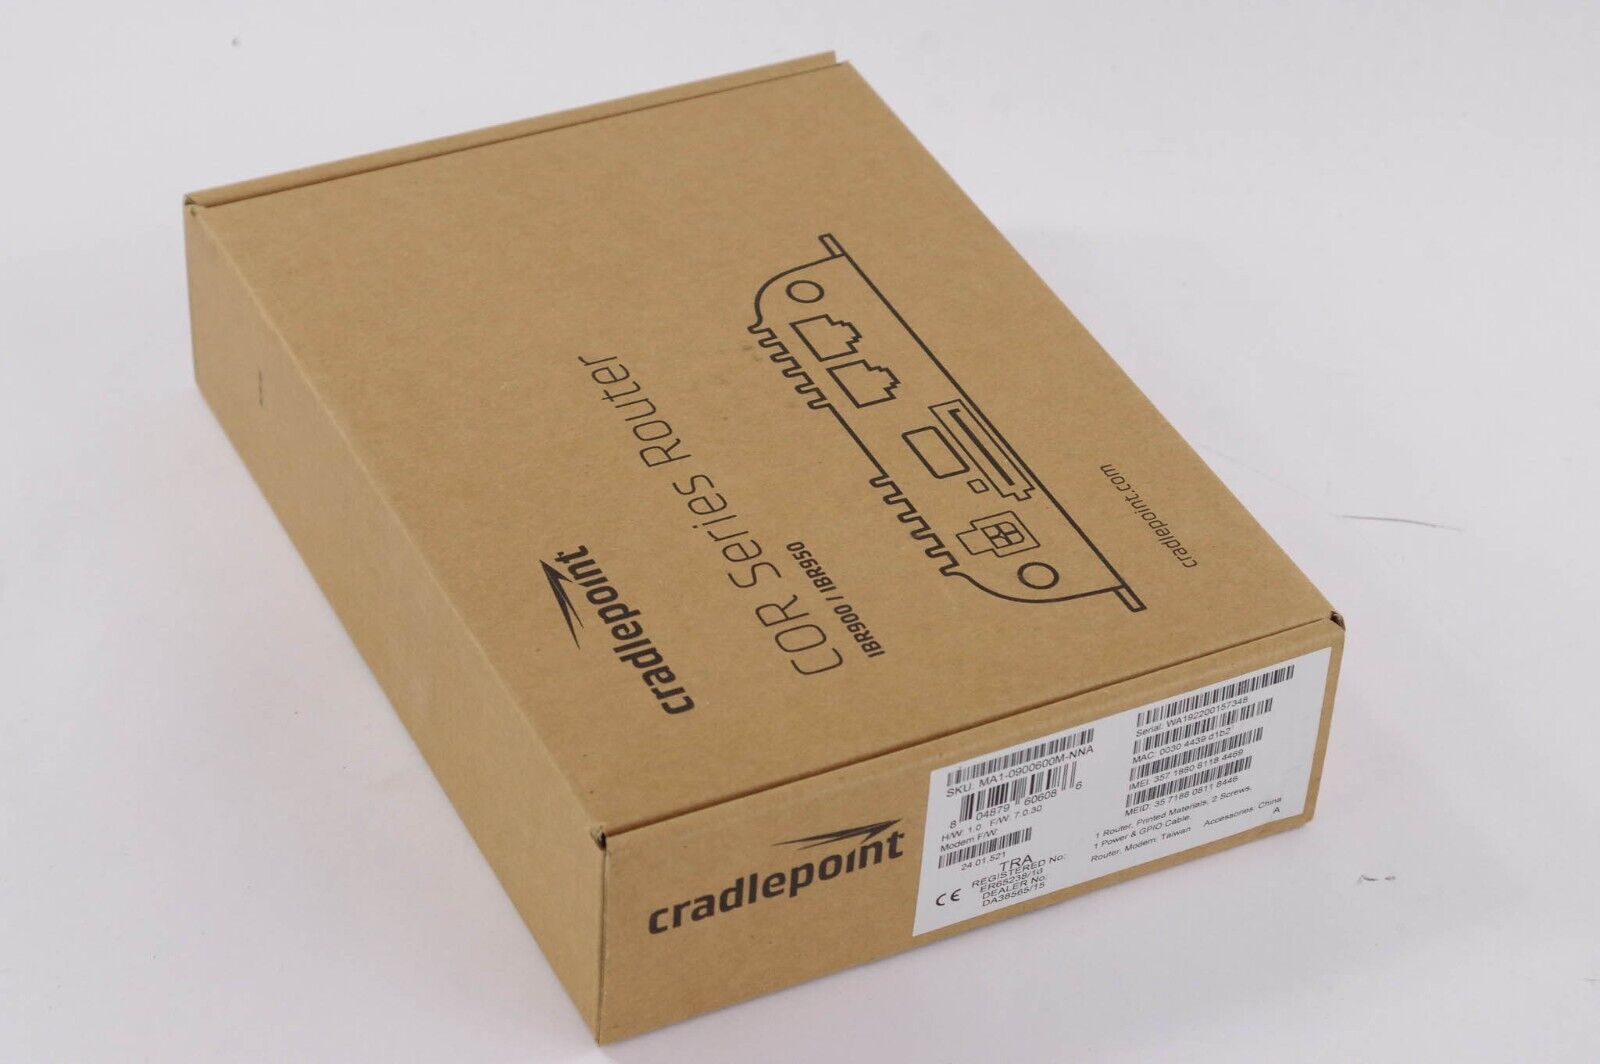 Cradlepoint IBR900-600M / IBR900600M Cloud-Managed Networking Router